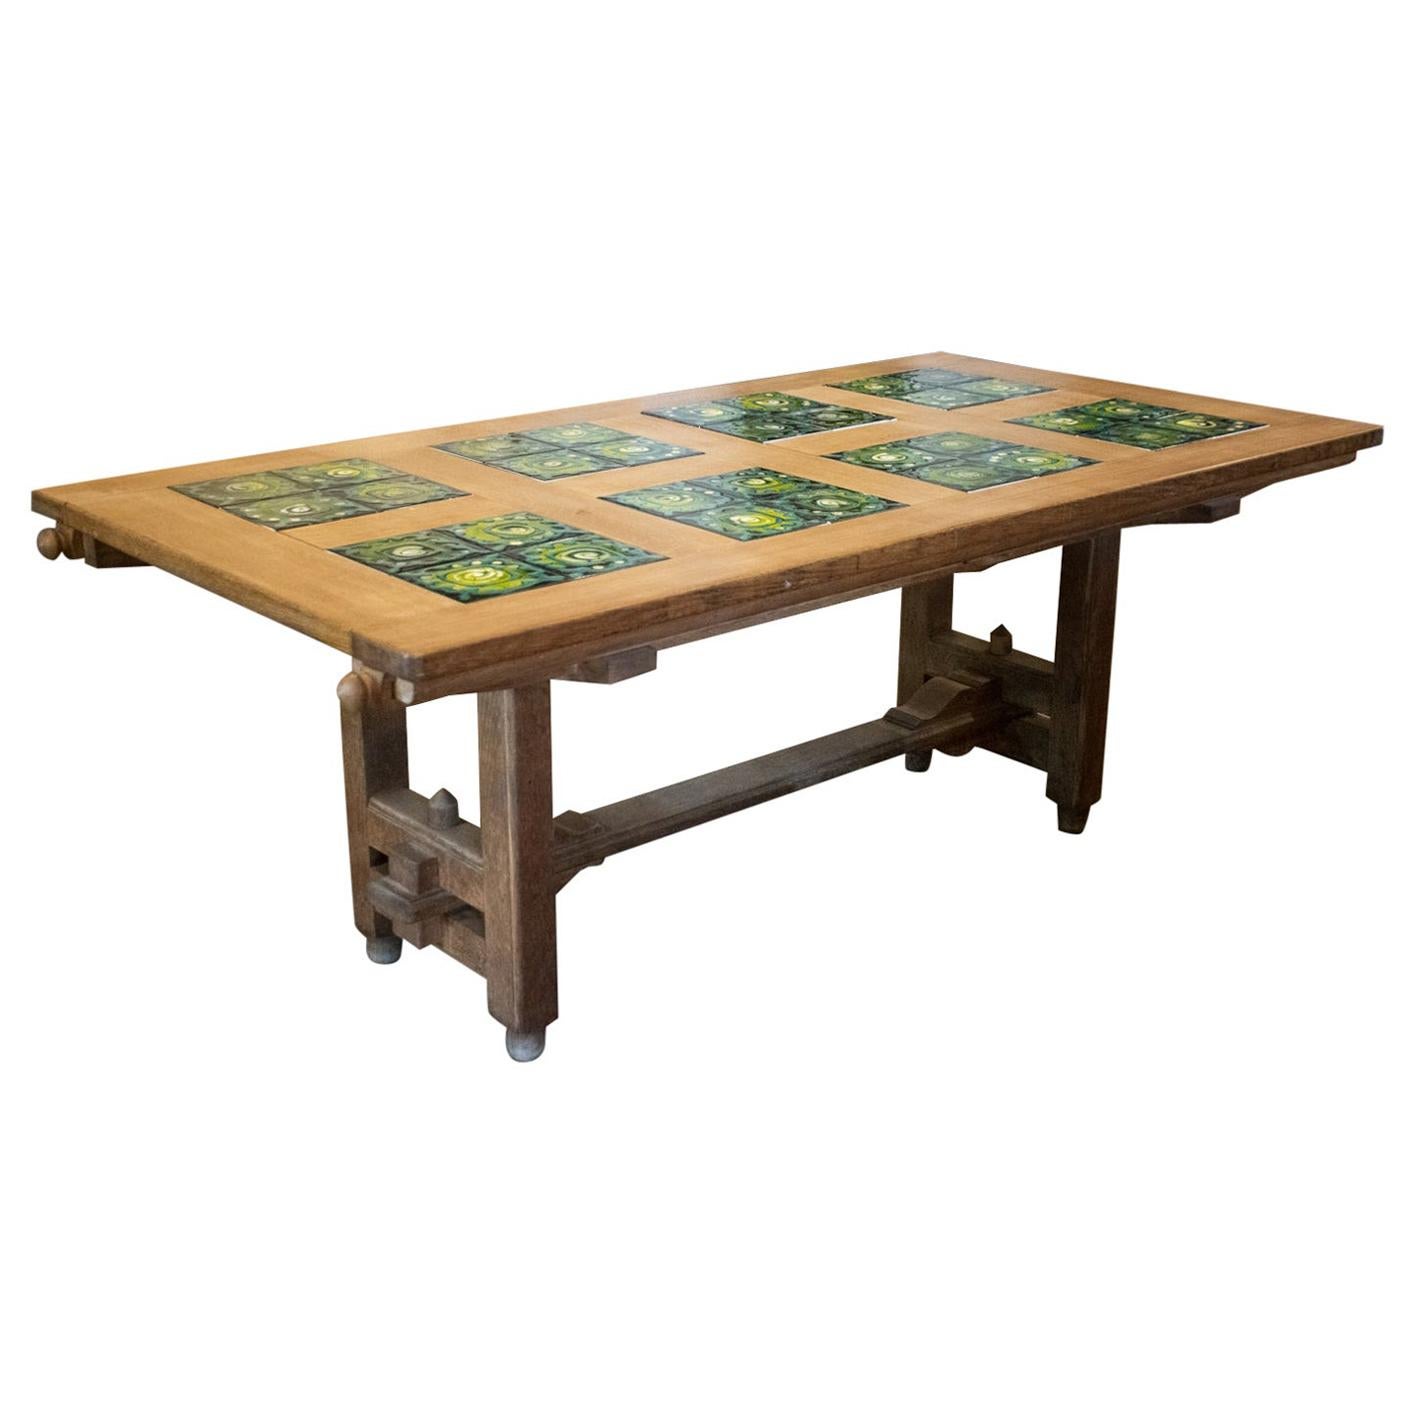 Guillerme et Chambron Oak and Tile Dining Table with Extensions, France, 1960's For Sale